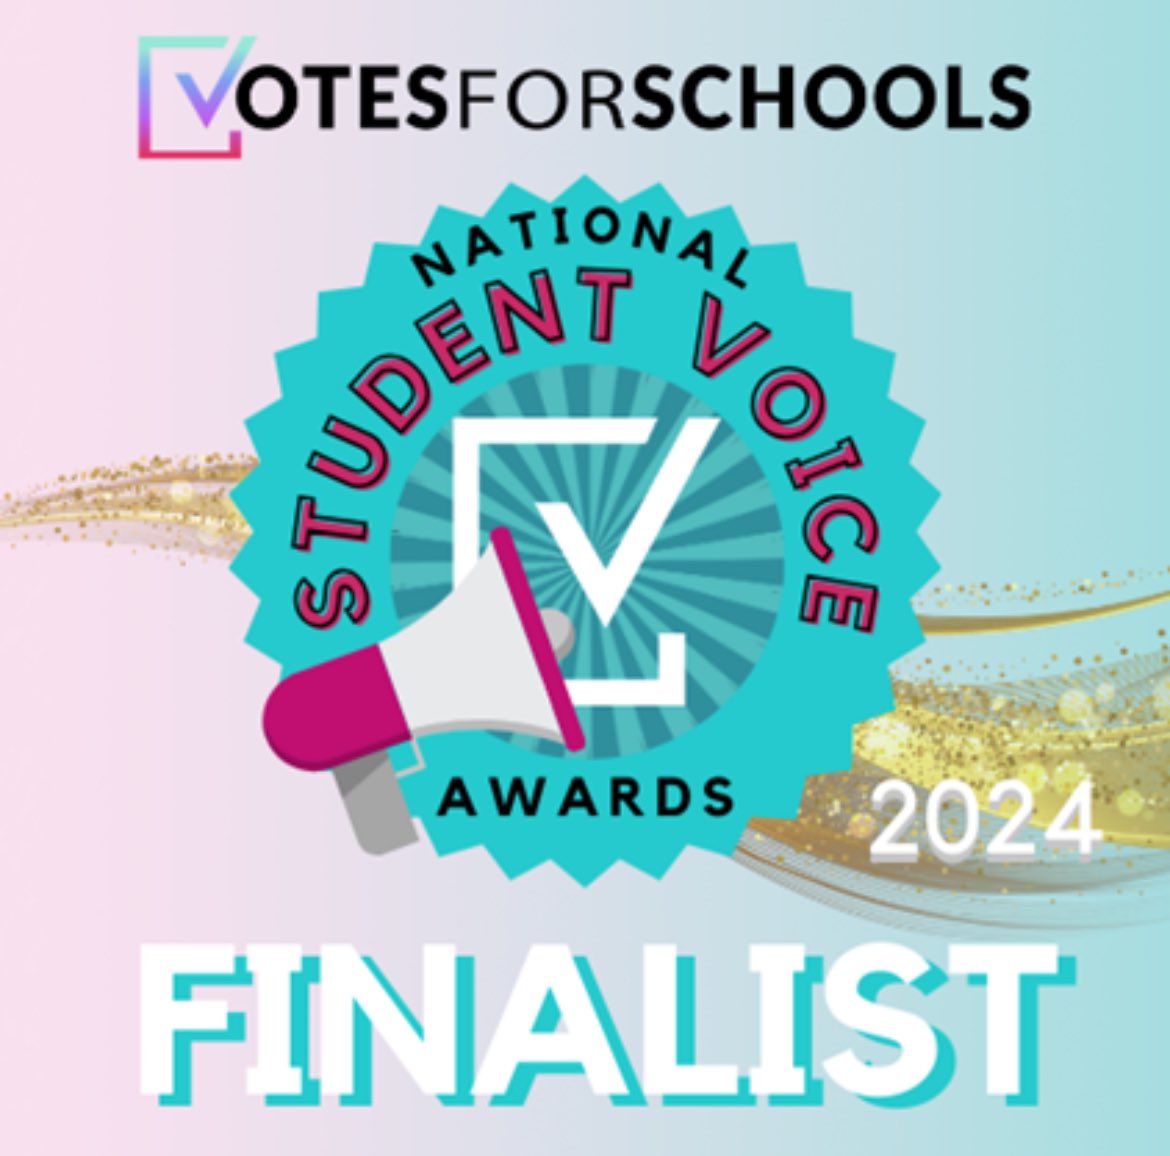 We are thrilled to announce that we are one of 7 finalists for the National Student Voice Awards this year. Winners will be announced week beginning 3rd June! We are so proud of pupil voice and how it is bringing real change to our school. #faithisourfoundation @votesforschools